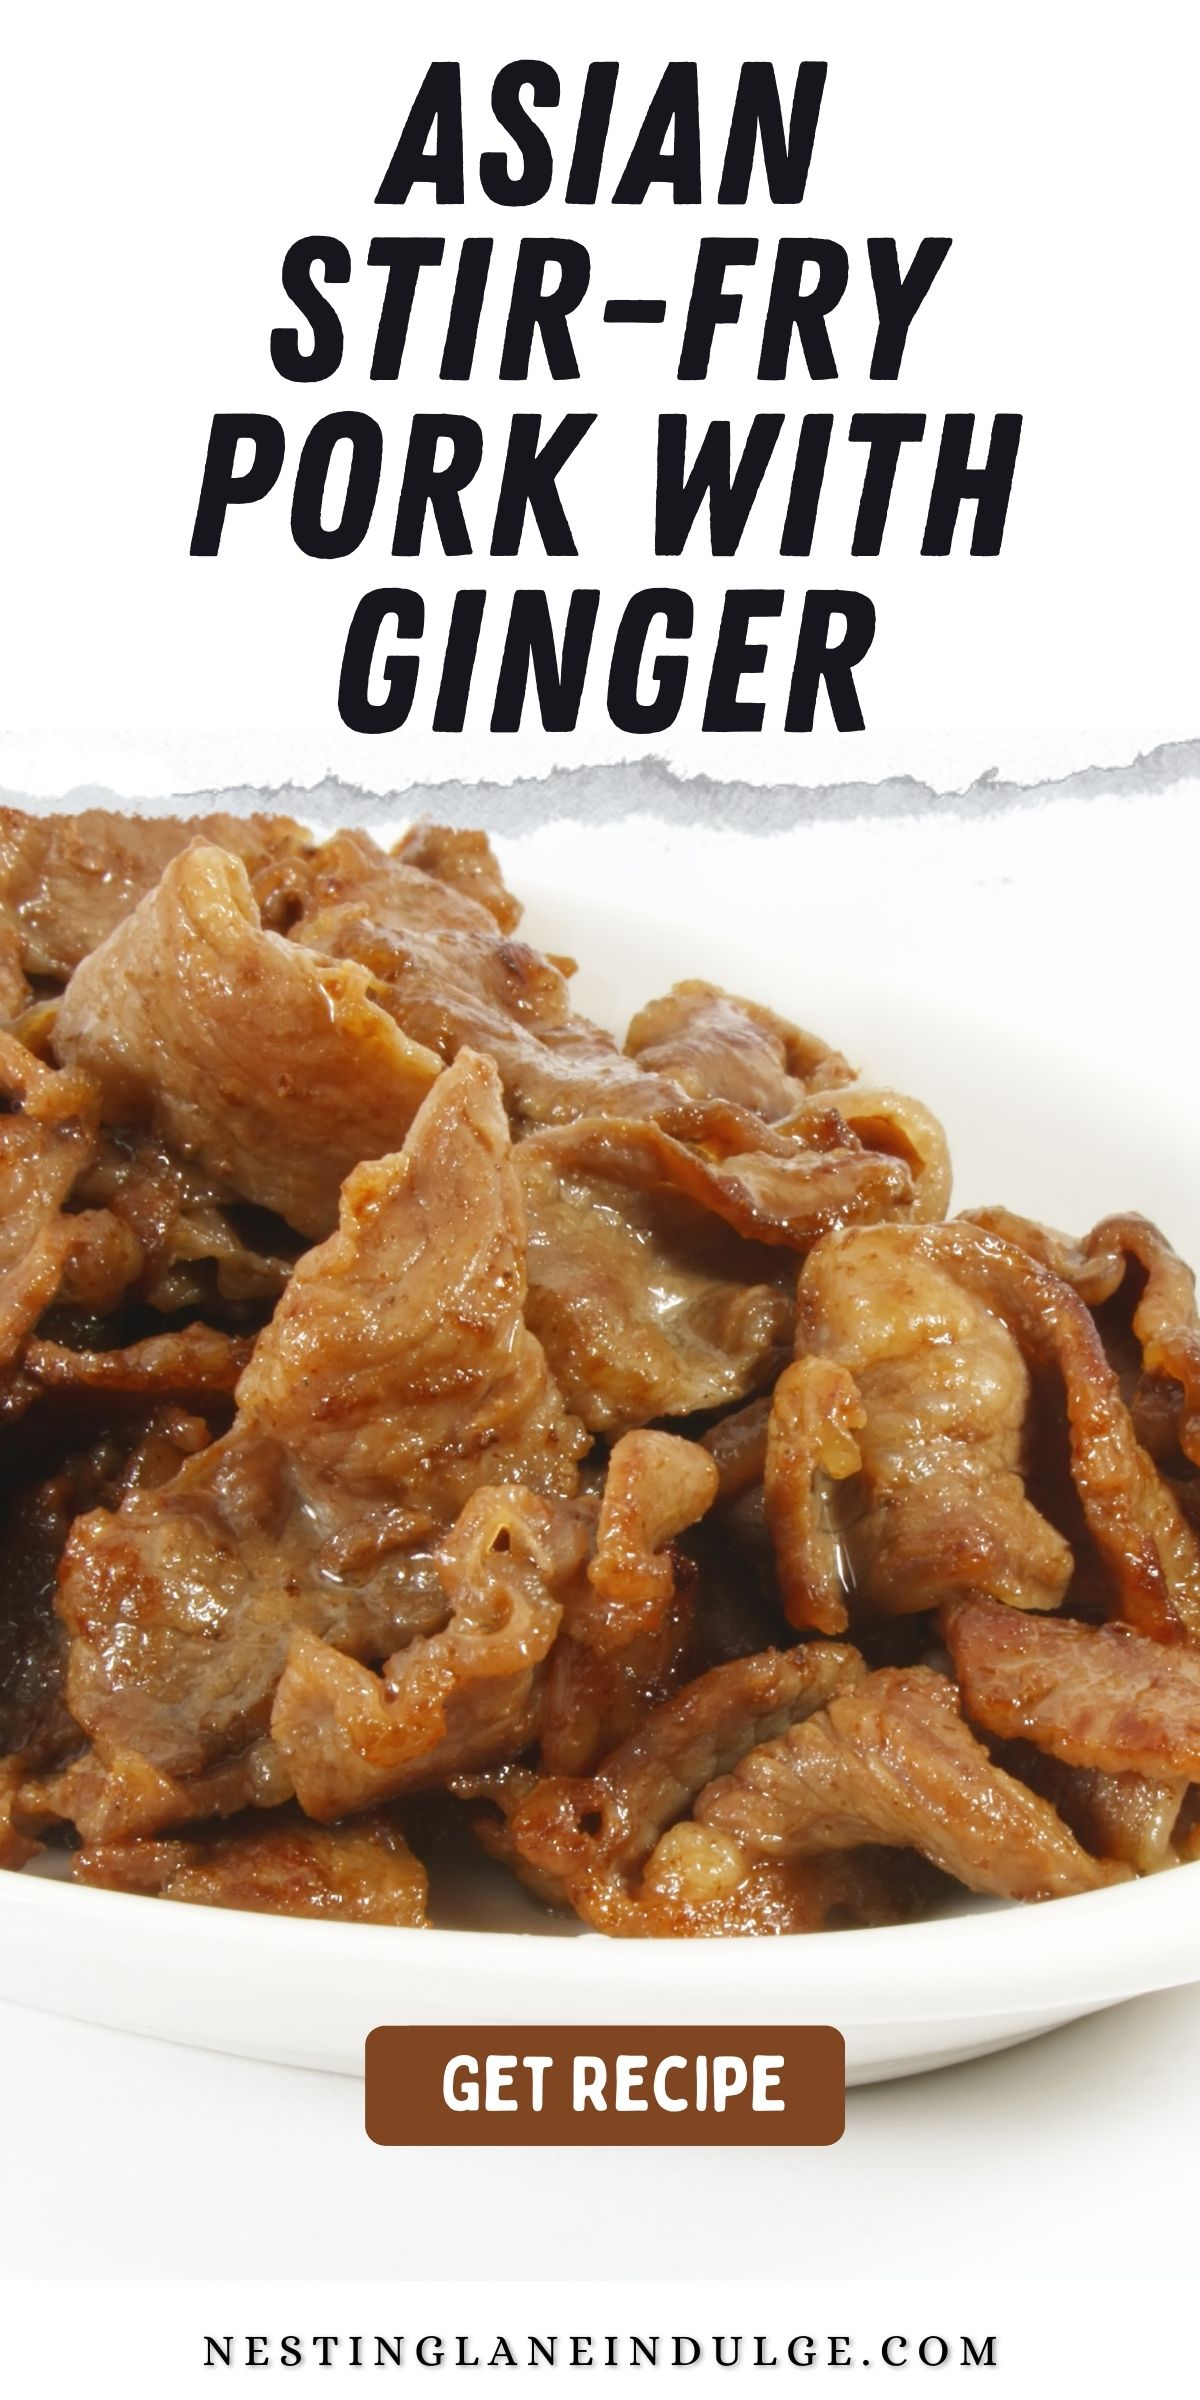 Asian Stir-Fry Pork with Ginger Graphic.